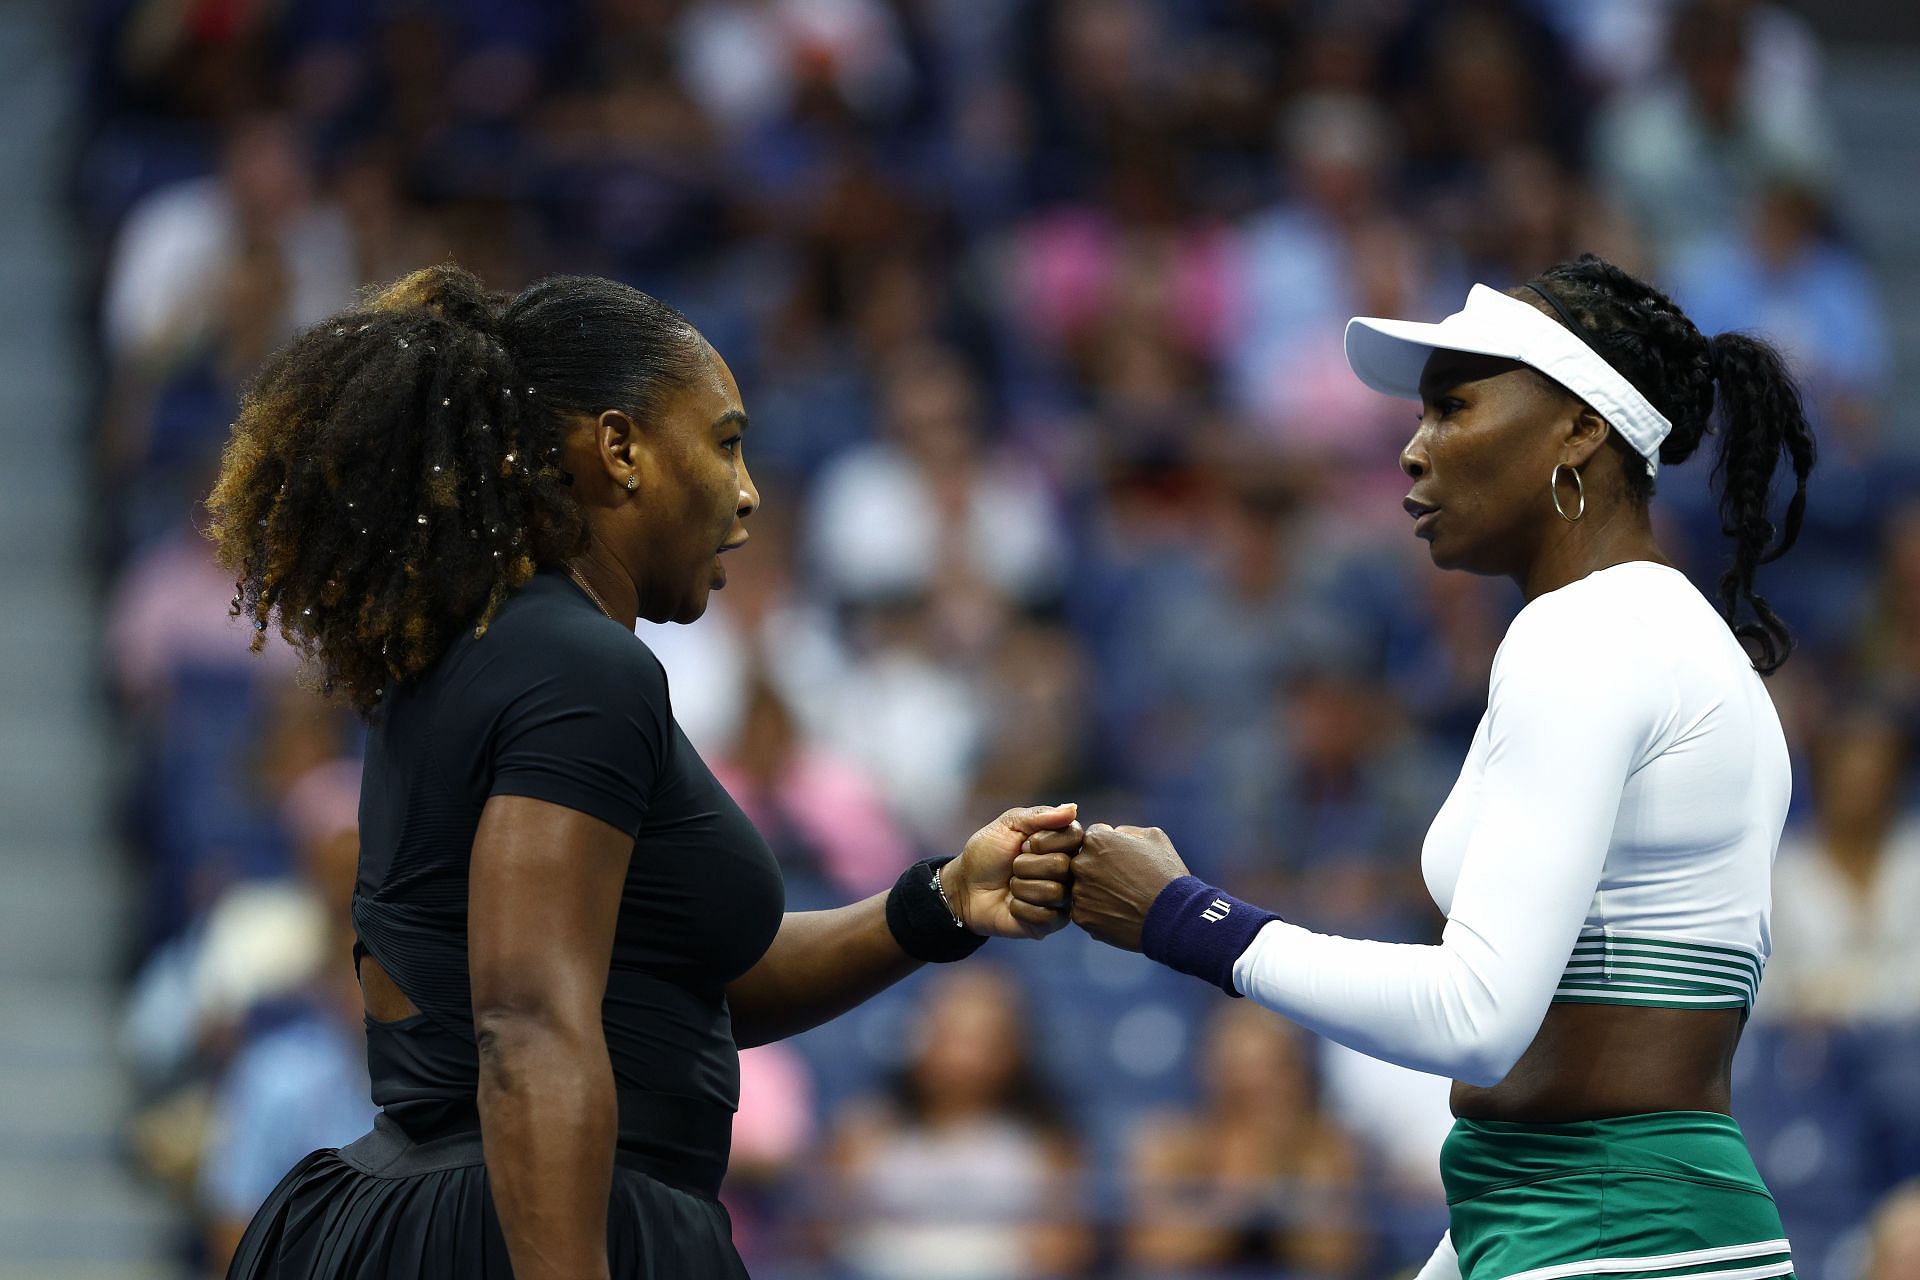 Serena and Venus Williams at the 2022 US Open